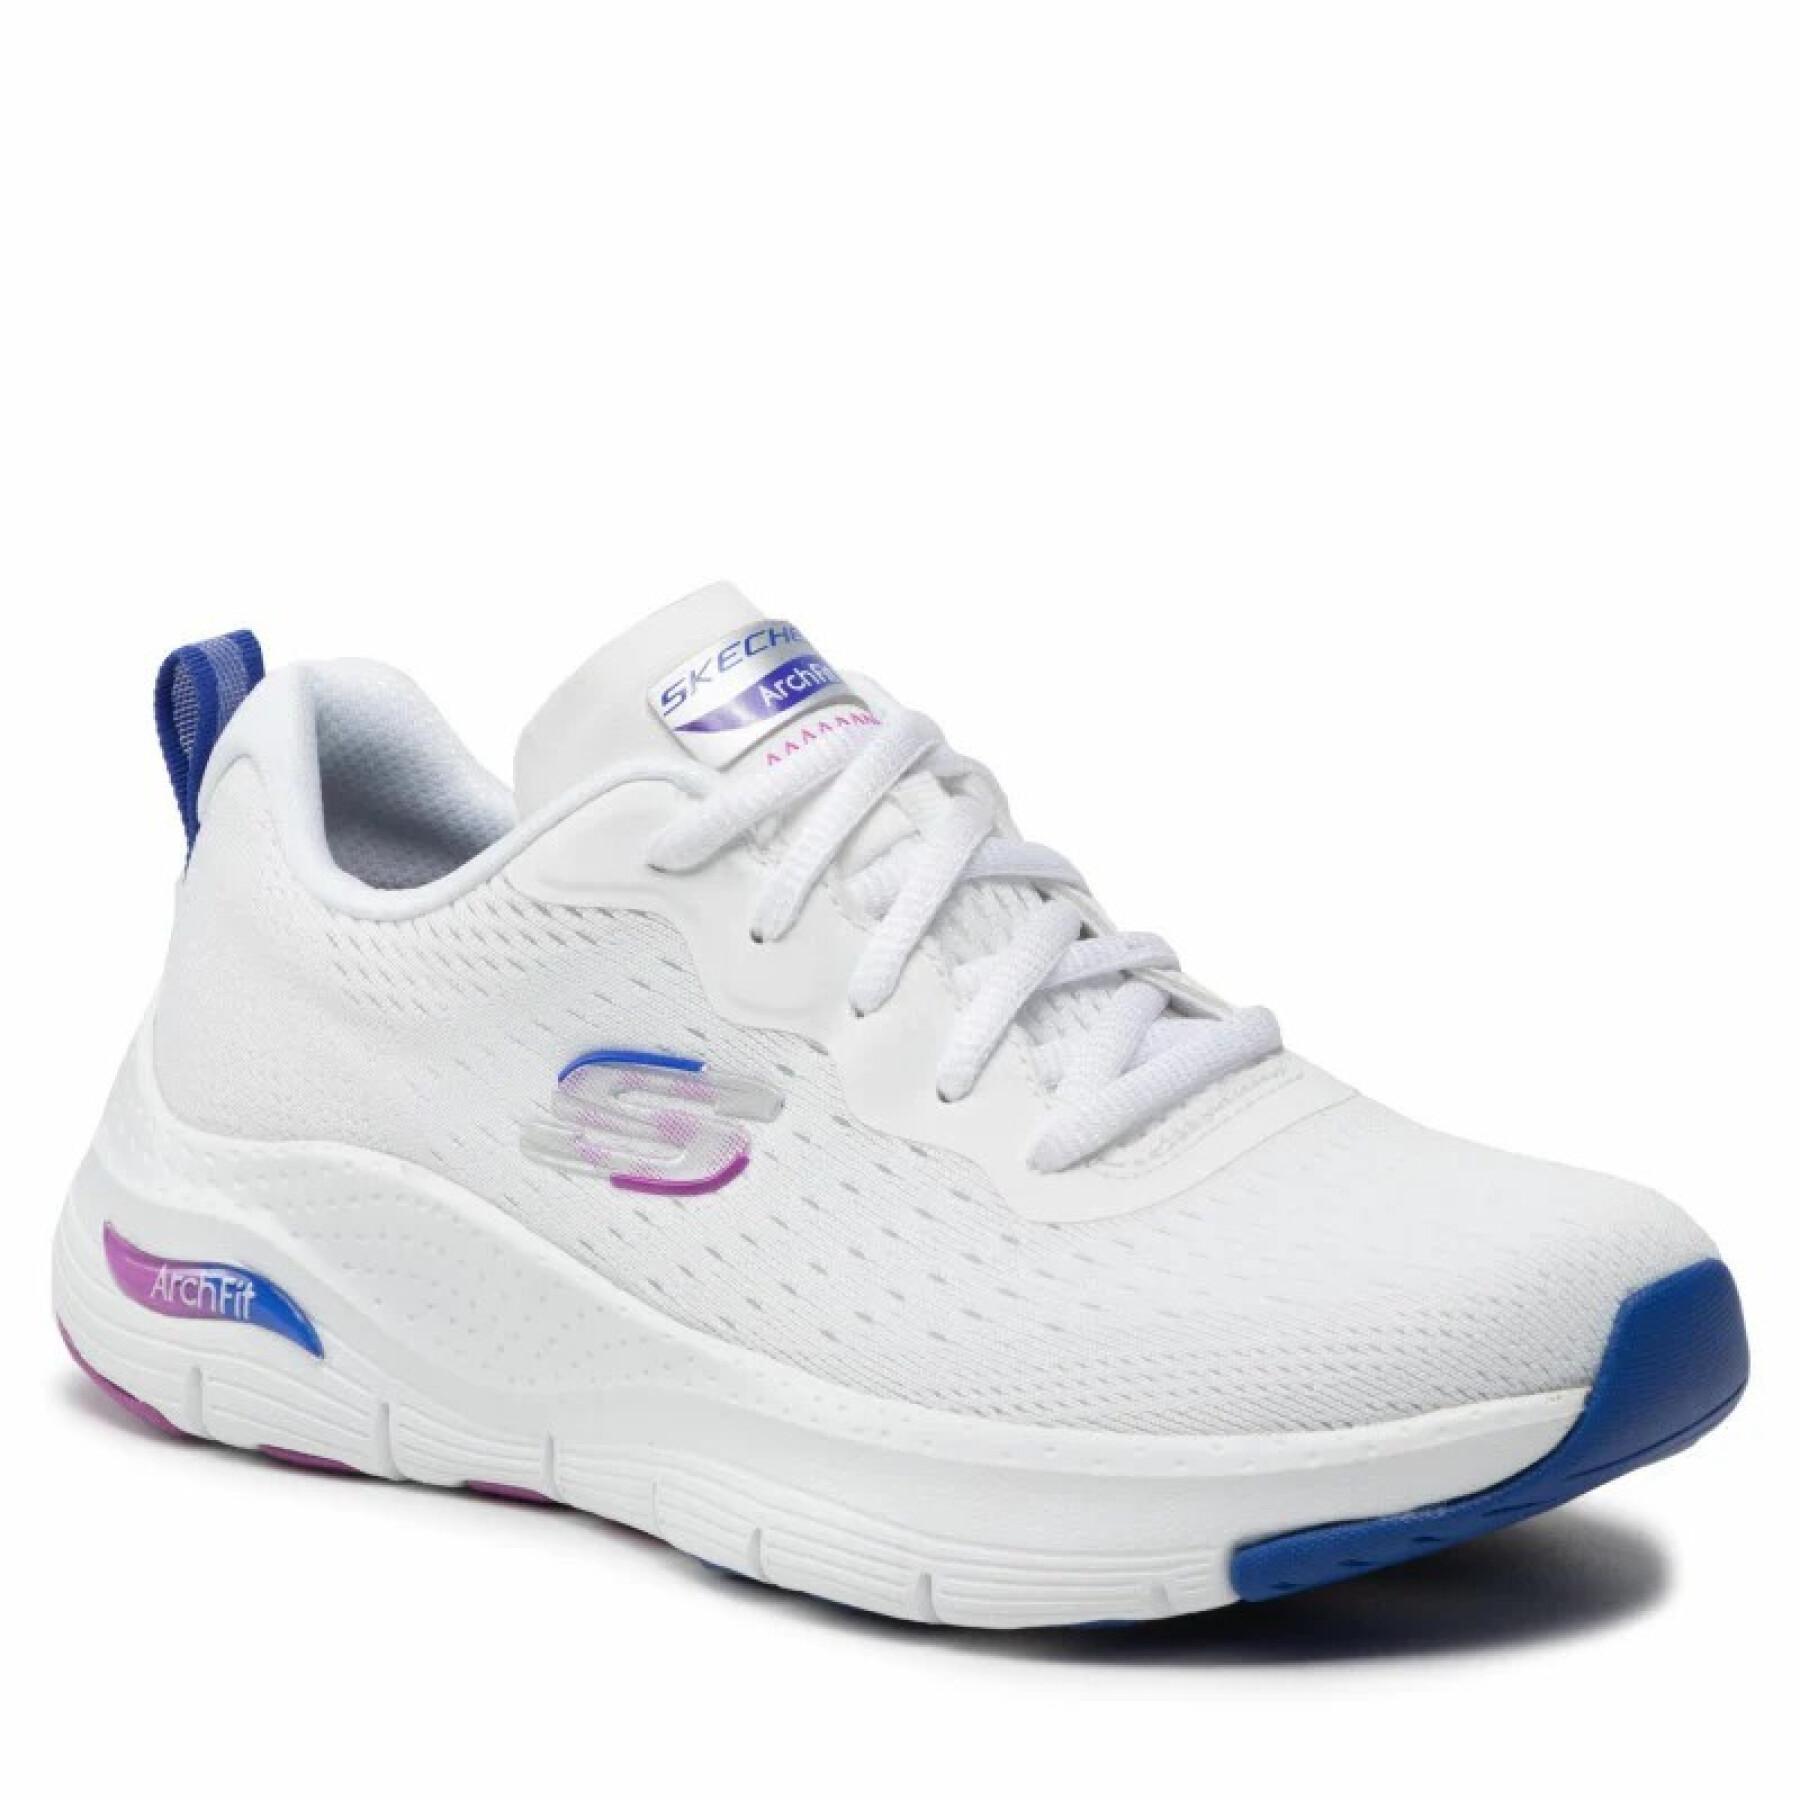 Baskets femme Skechers Arch Fit-Infinity Cool